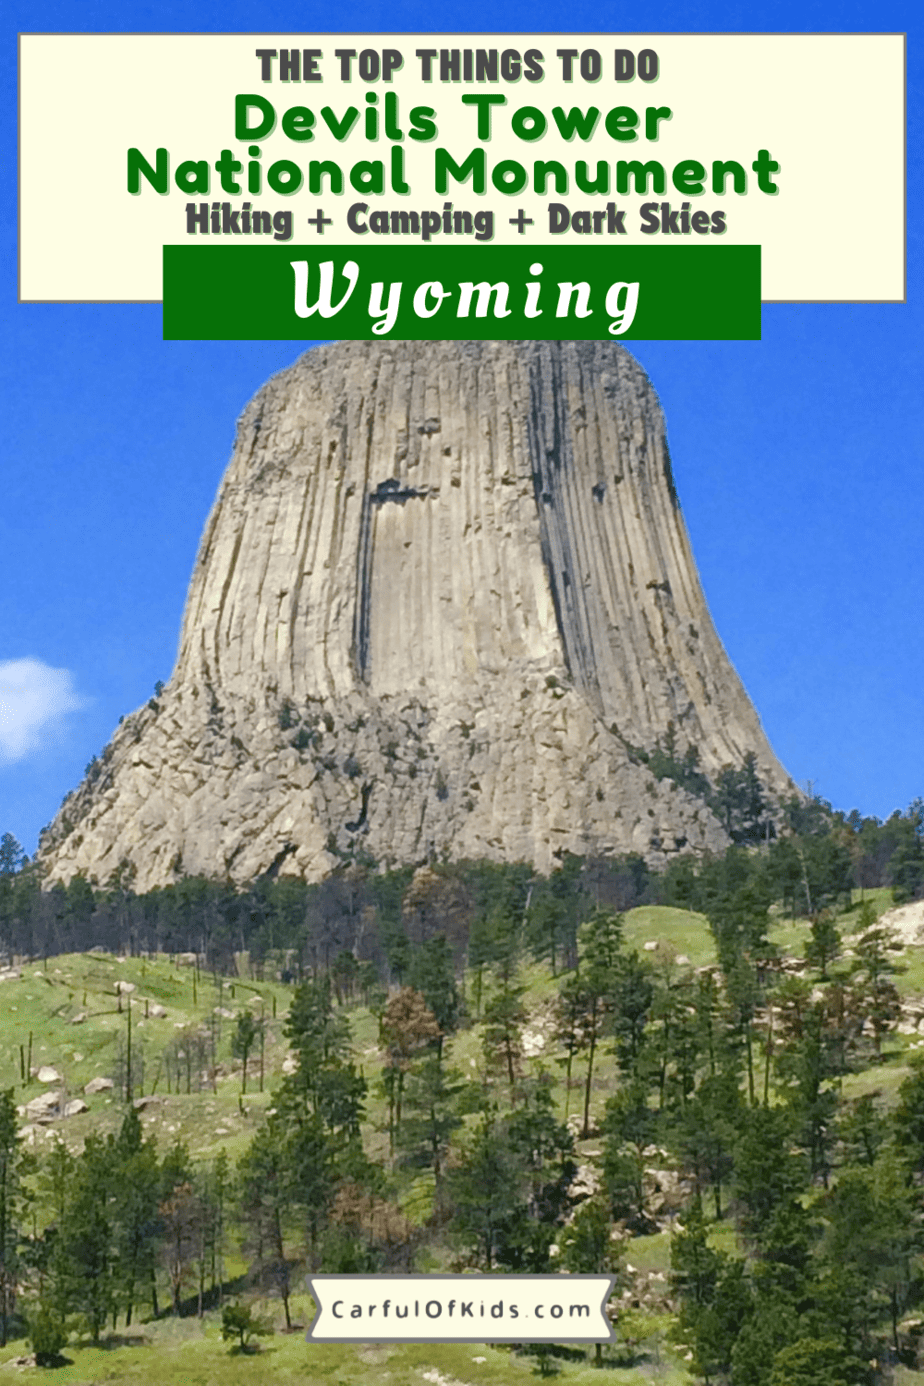 The Devils Tower National Monument in Wyoming offers hiking, camping along with Ranger Programs. Here's all the details you need to plan your trip, what to do at Devils Tower, where to hike and where to stay while exploring Devils Tower National Monument along with camping. What to do in Devils Tower | Where to stay near Devils Tower | Road Trip Stops in Wyoming #NationalParks #Wyoming 